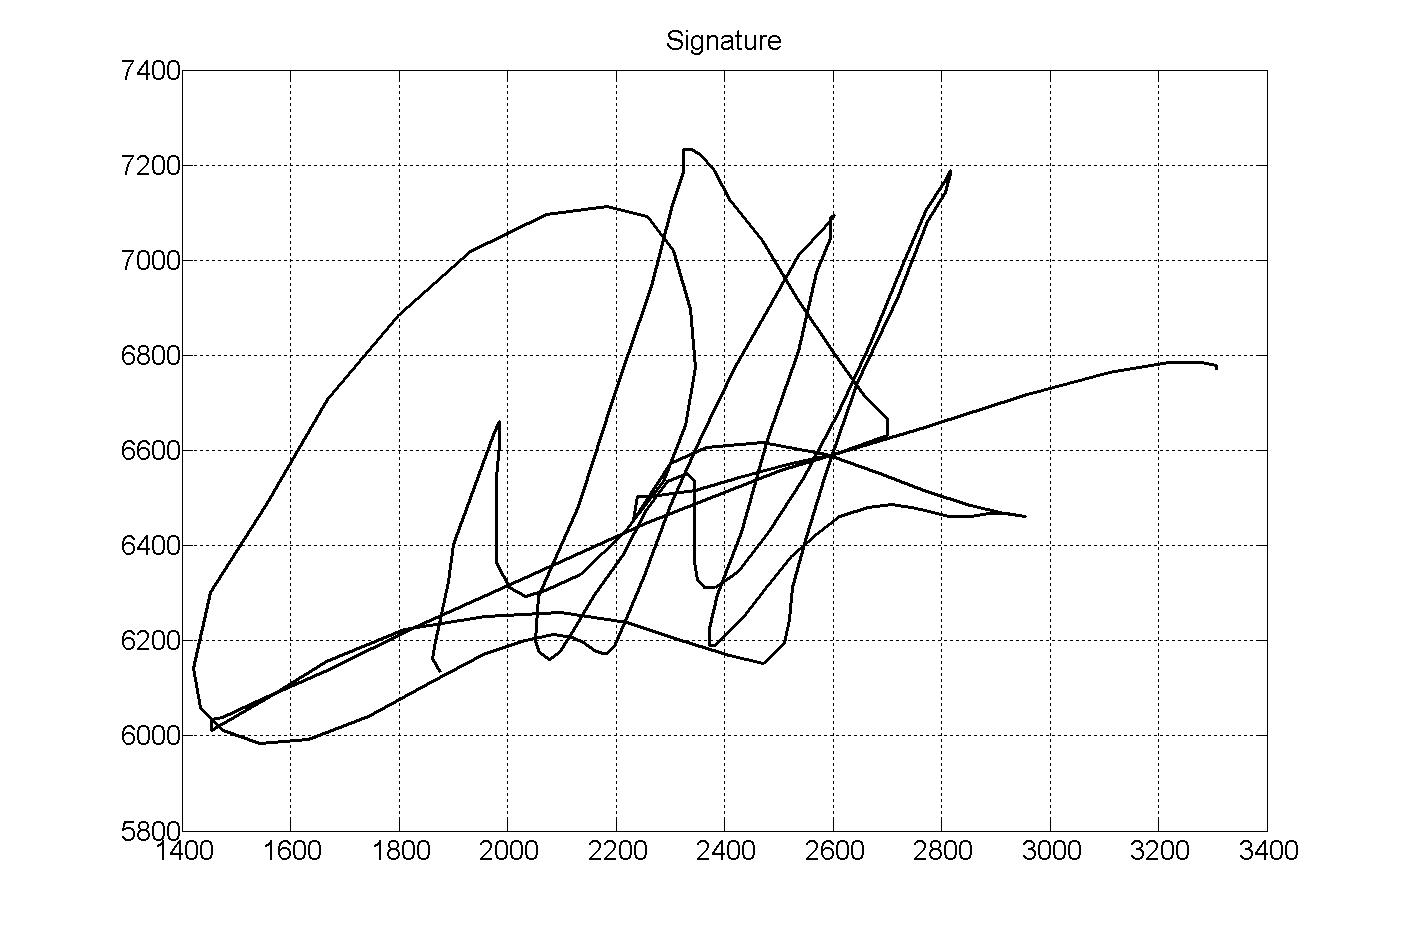 Digital Image Of A Optical Signature Recognition